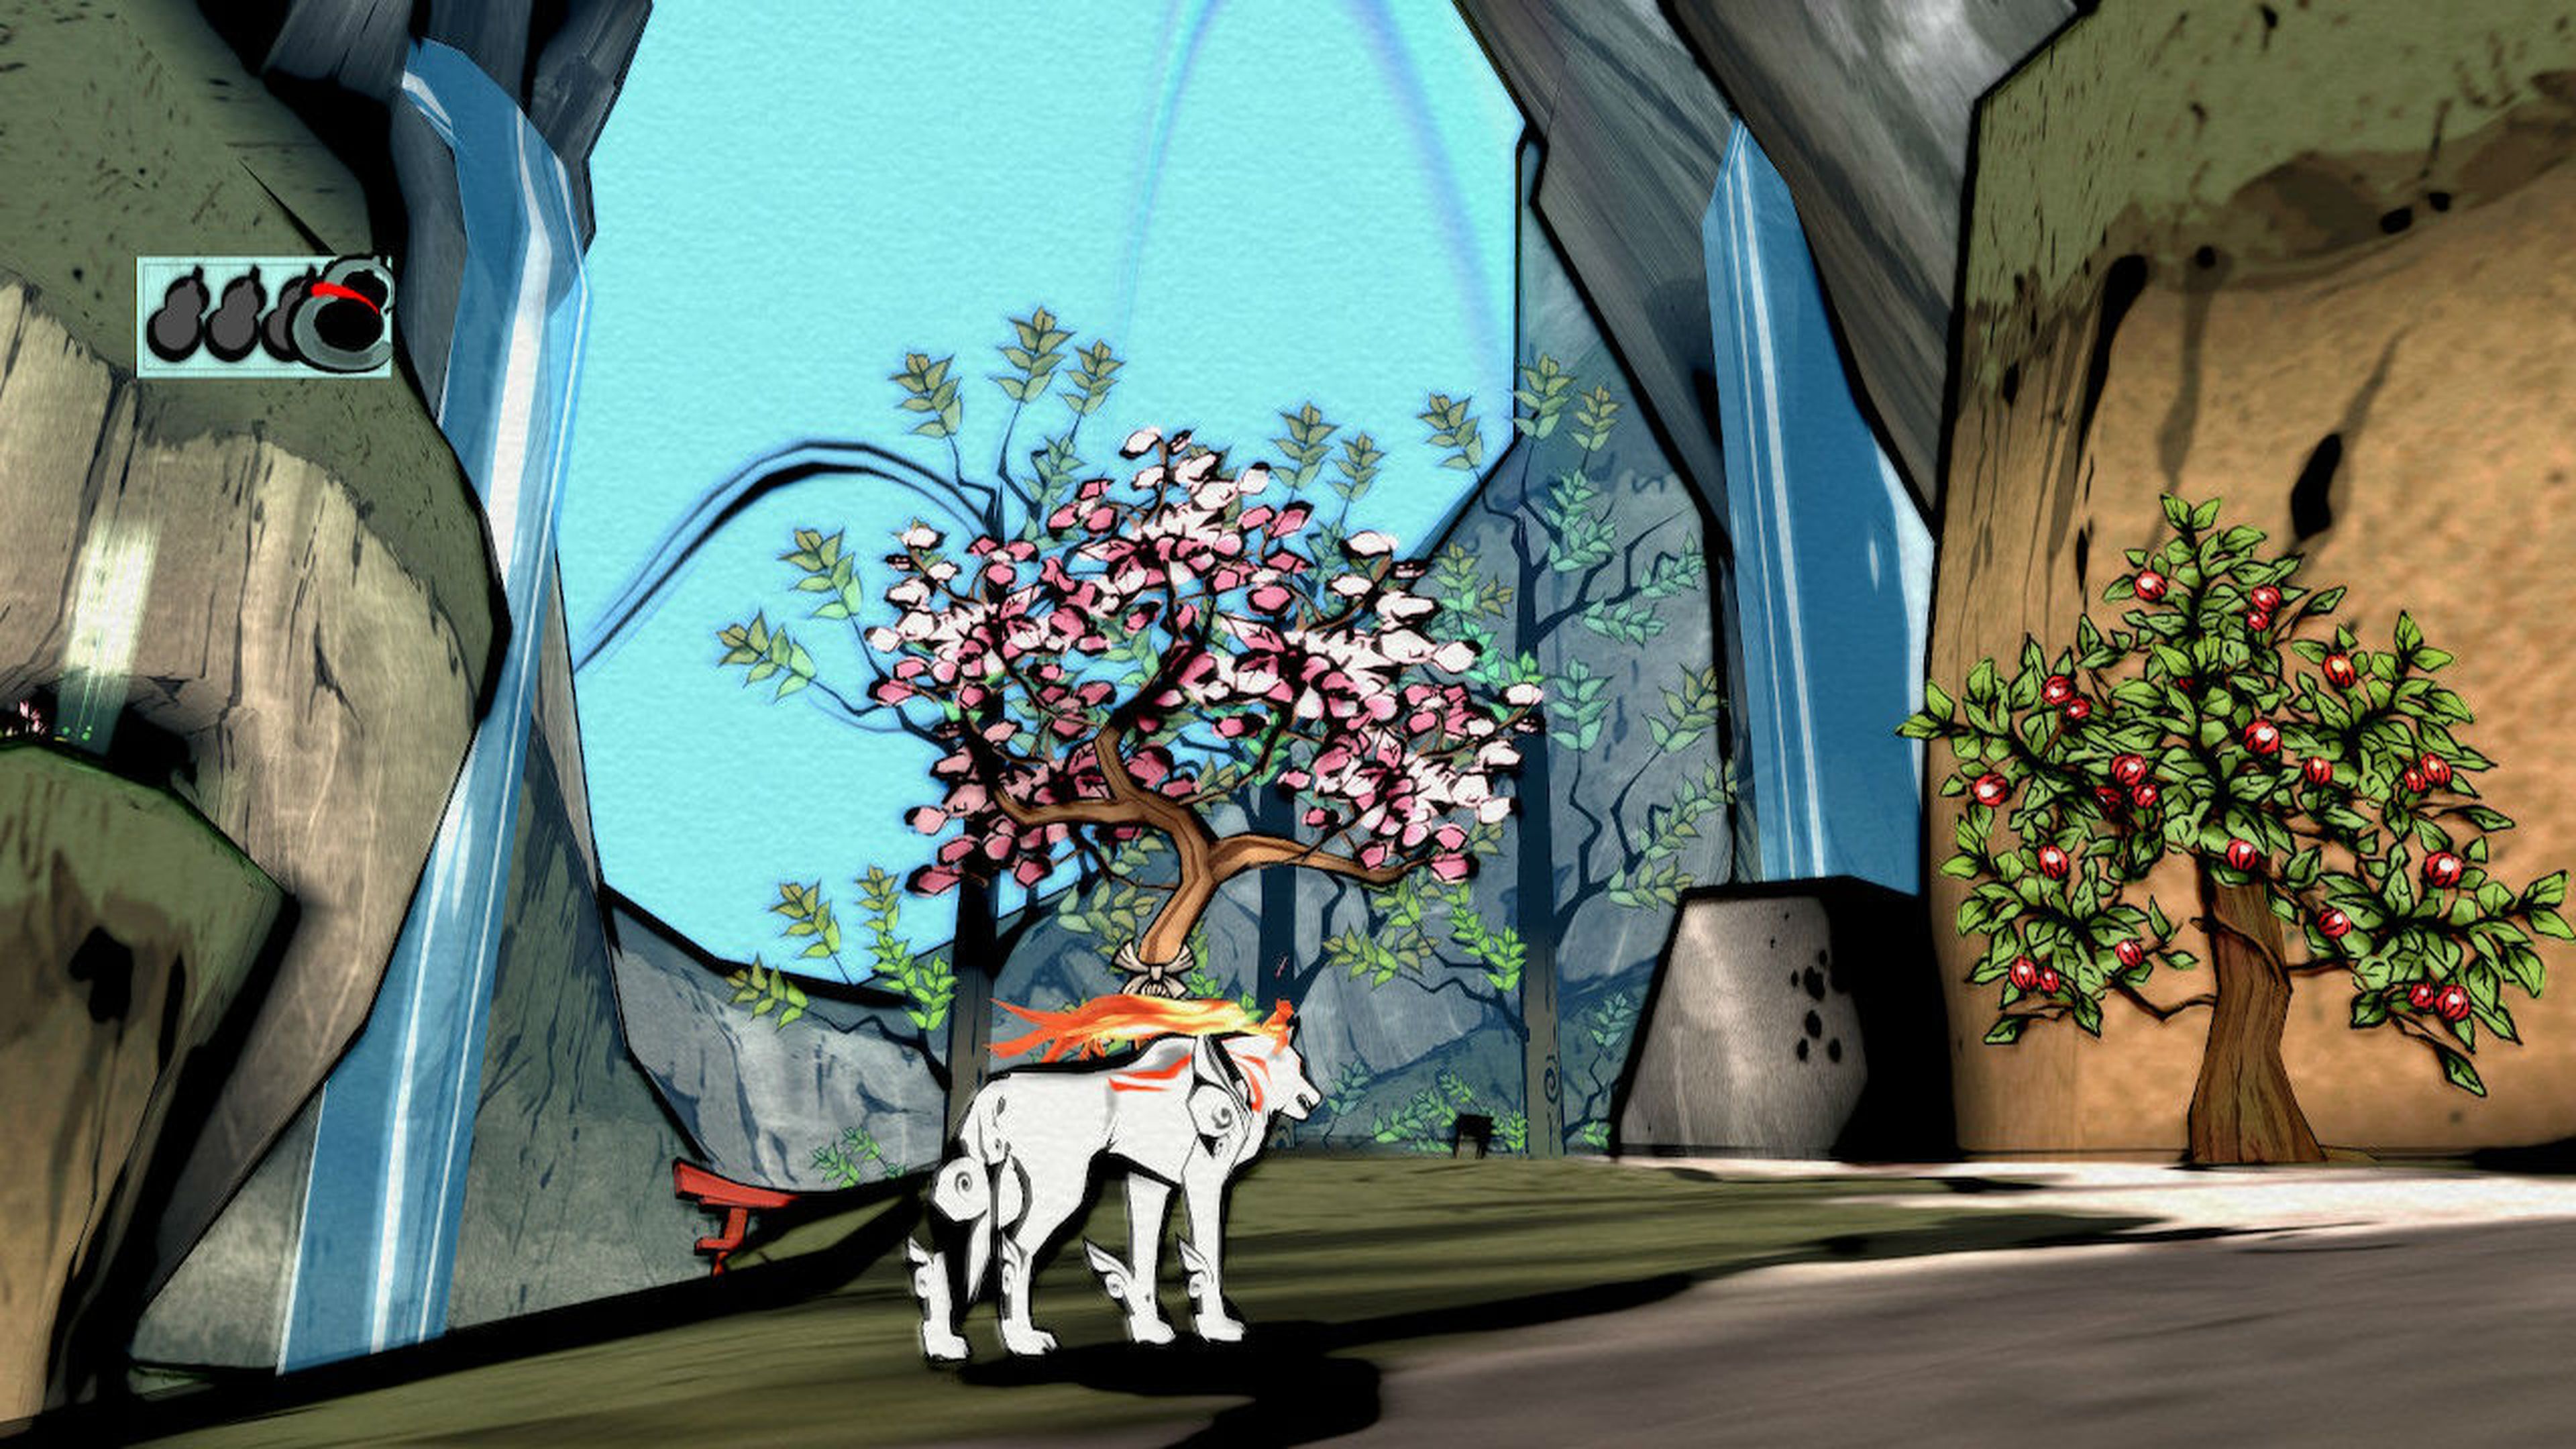 Okami [NS, PC, PS2, PS3, PS4, Wii, XBO] – Flower / Amaterasu